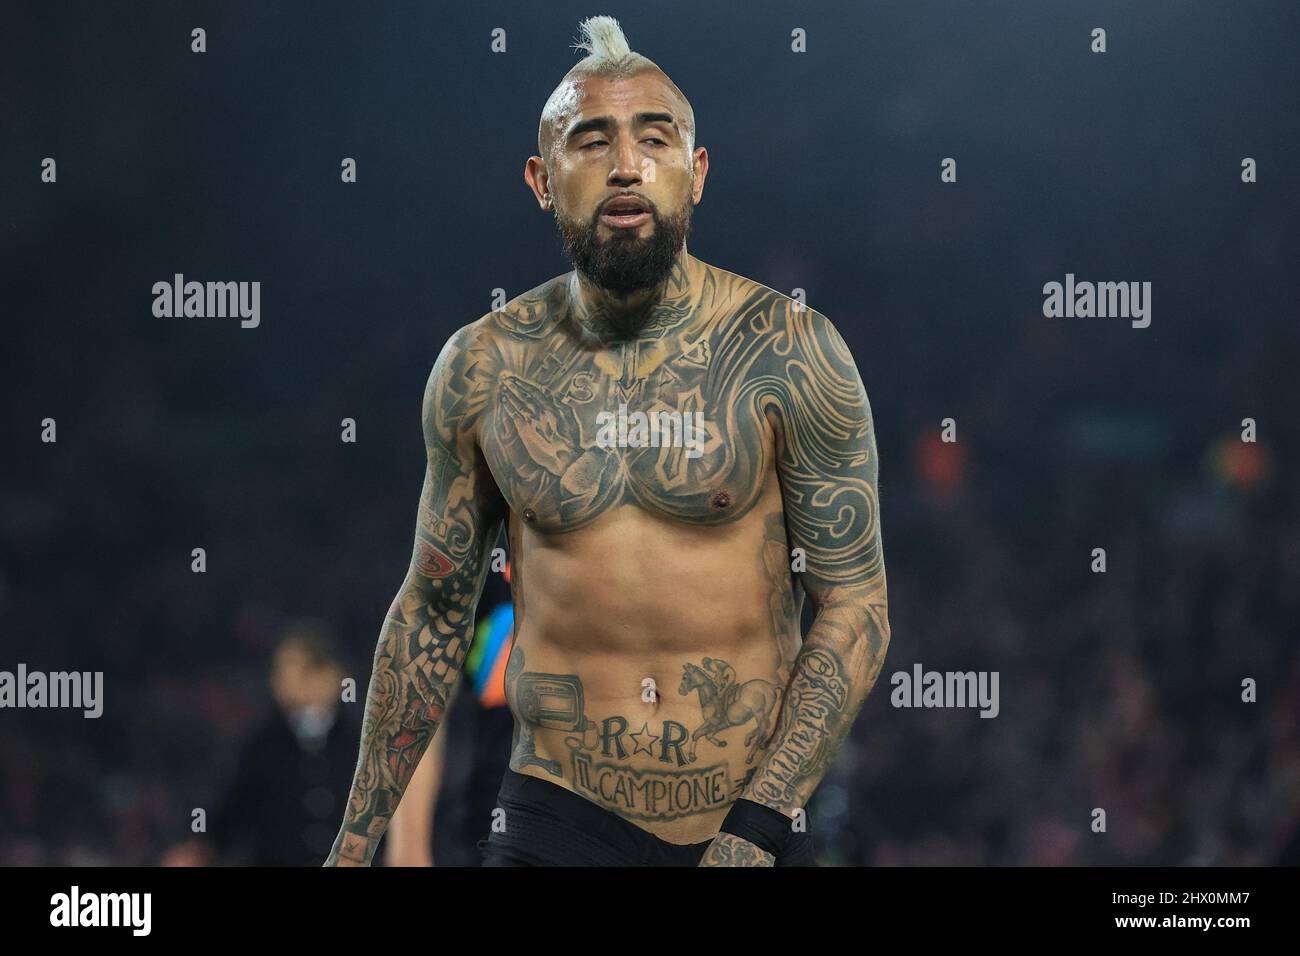 https://c8.alamy.com/comp/2HX0MM7/arturo-vidal-22-of-inter-milan-takes-his-top-off-after-the-final-white-2HX0MM7.jpg